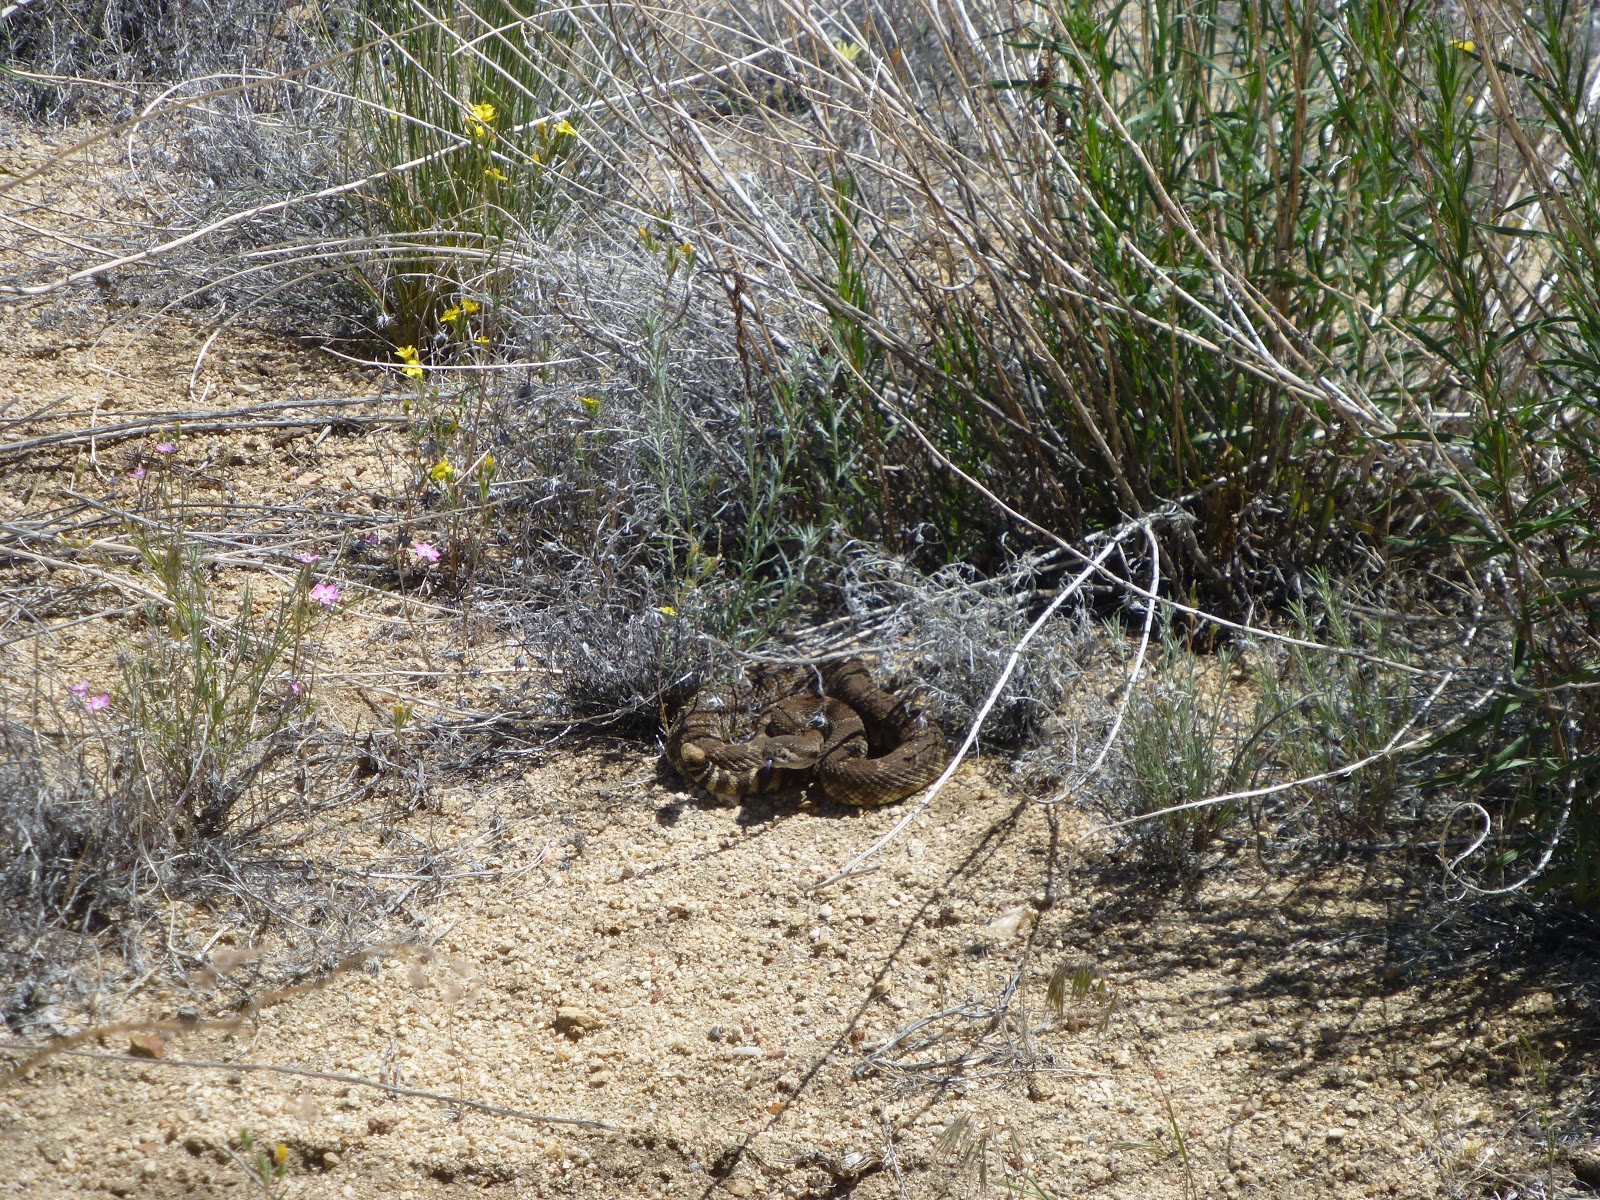 This rattler started rattling away right when Idan passed it, and I was behind. We both jumped instantly.